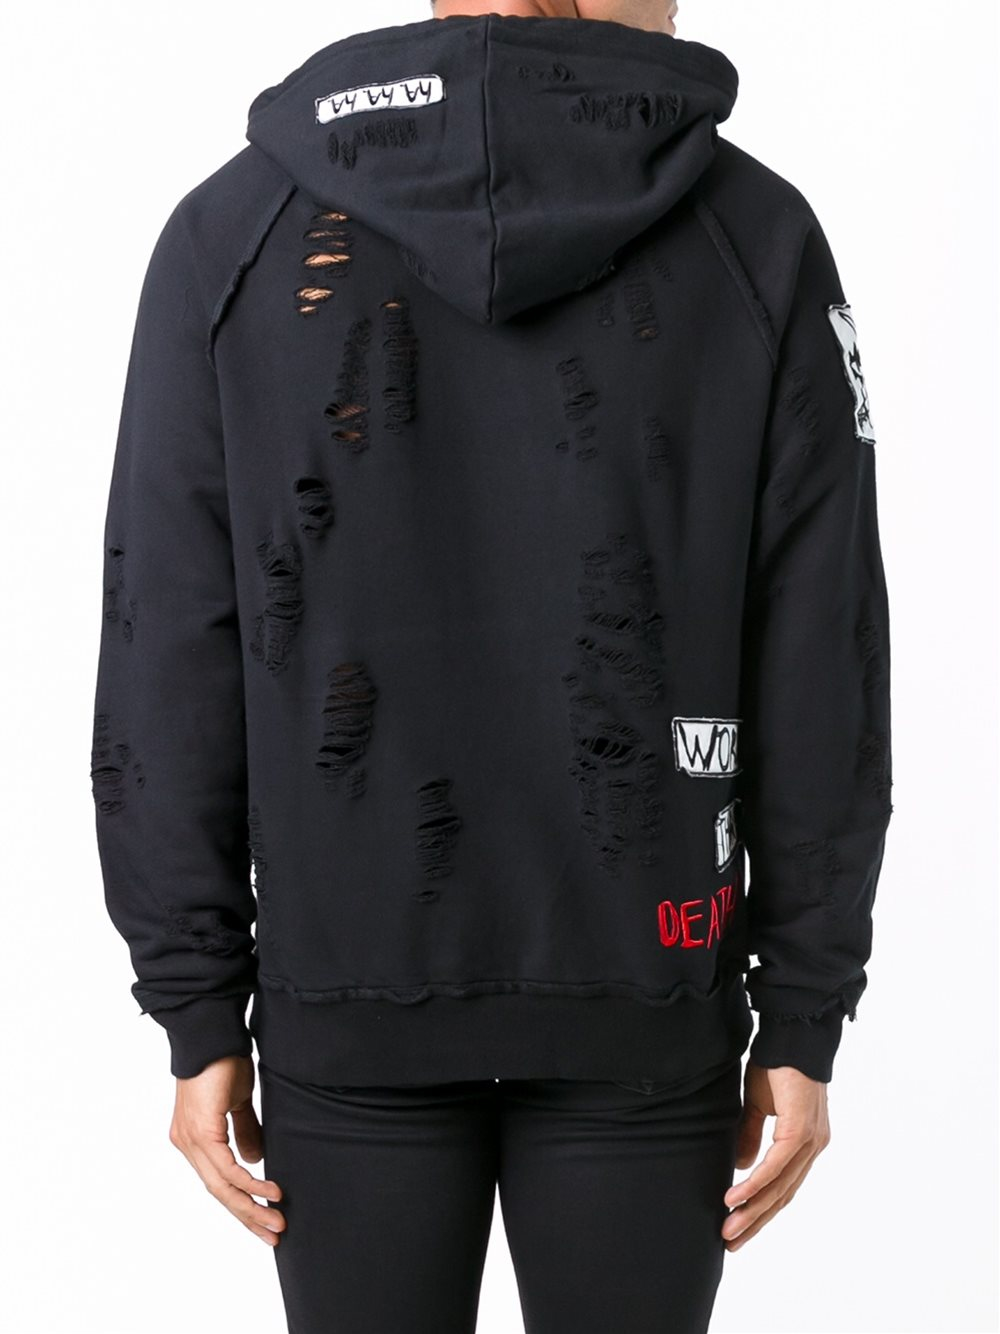 Haculla Arm Patch Ripped Hoodie in Black for Men - Lyst